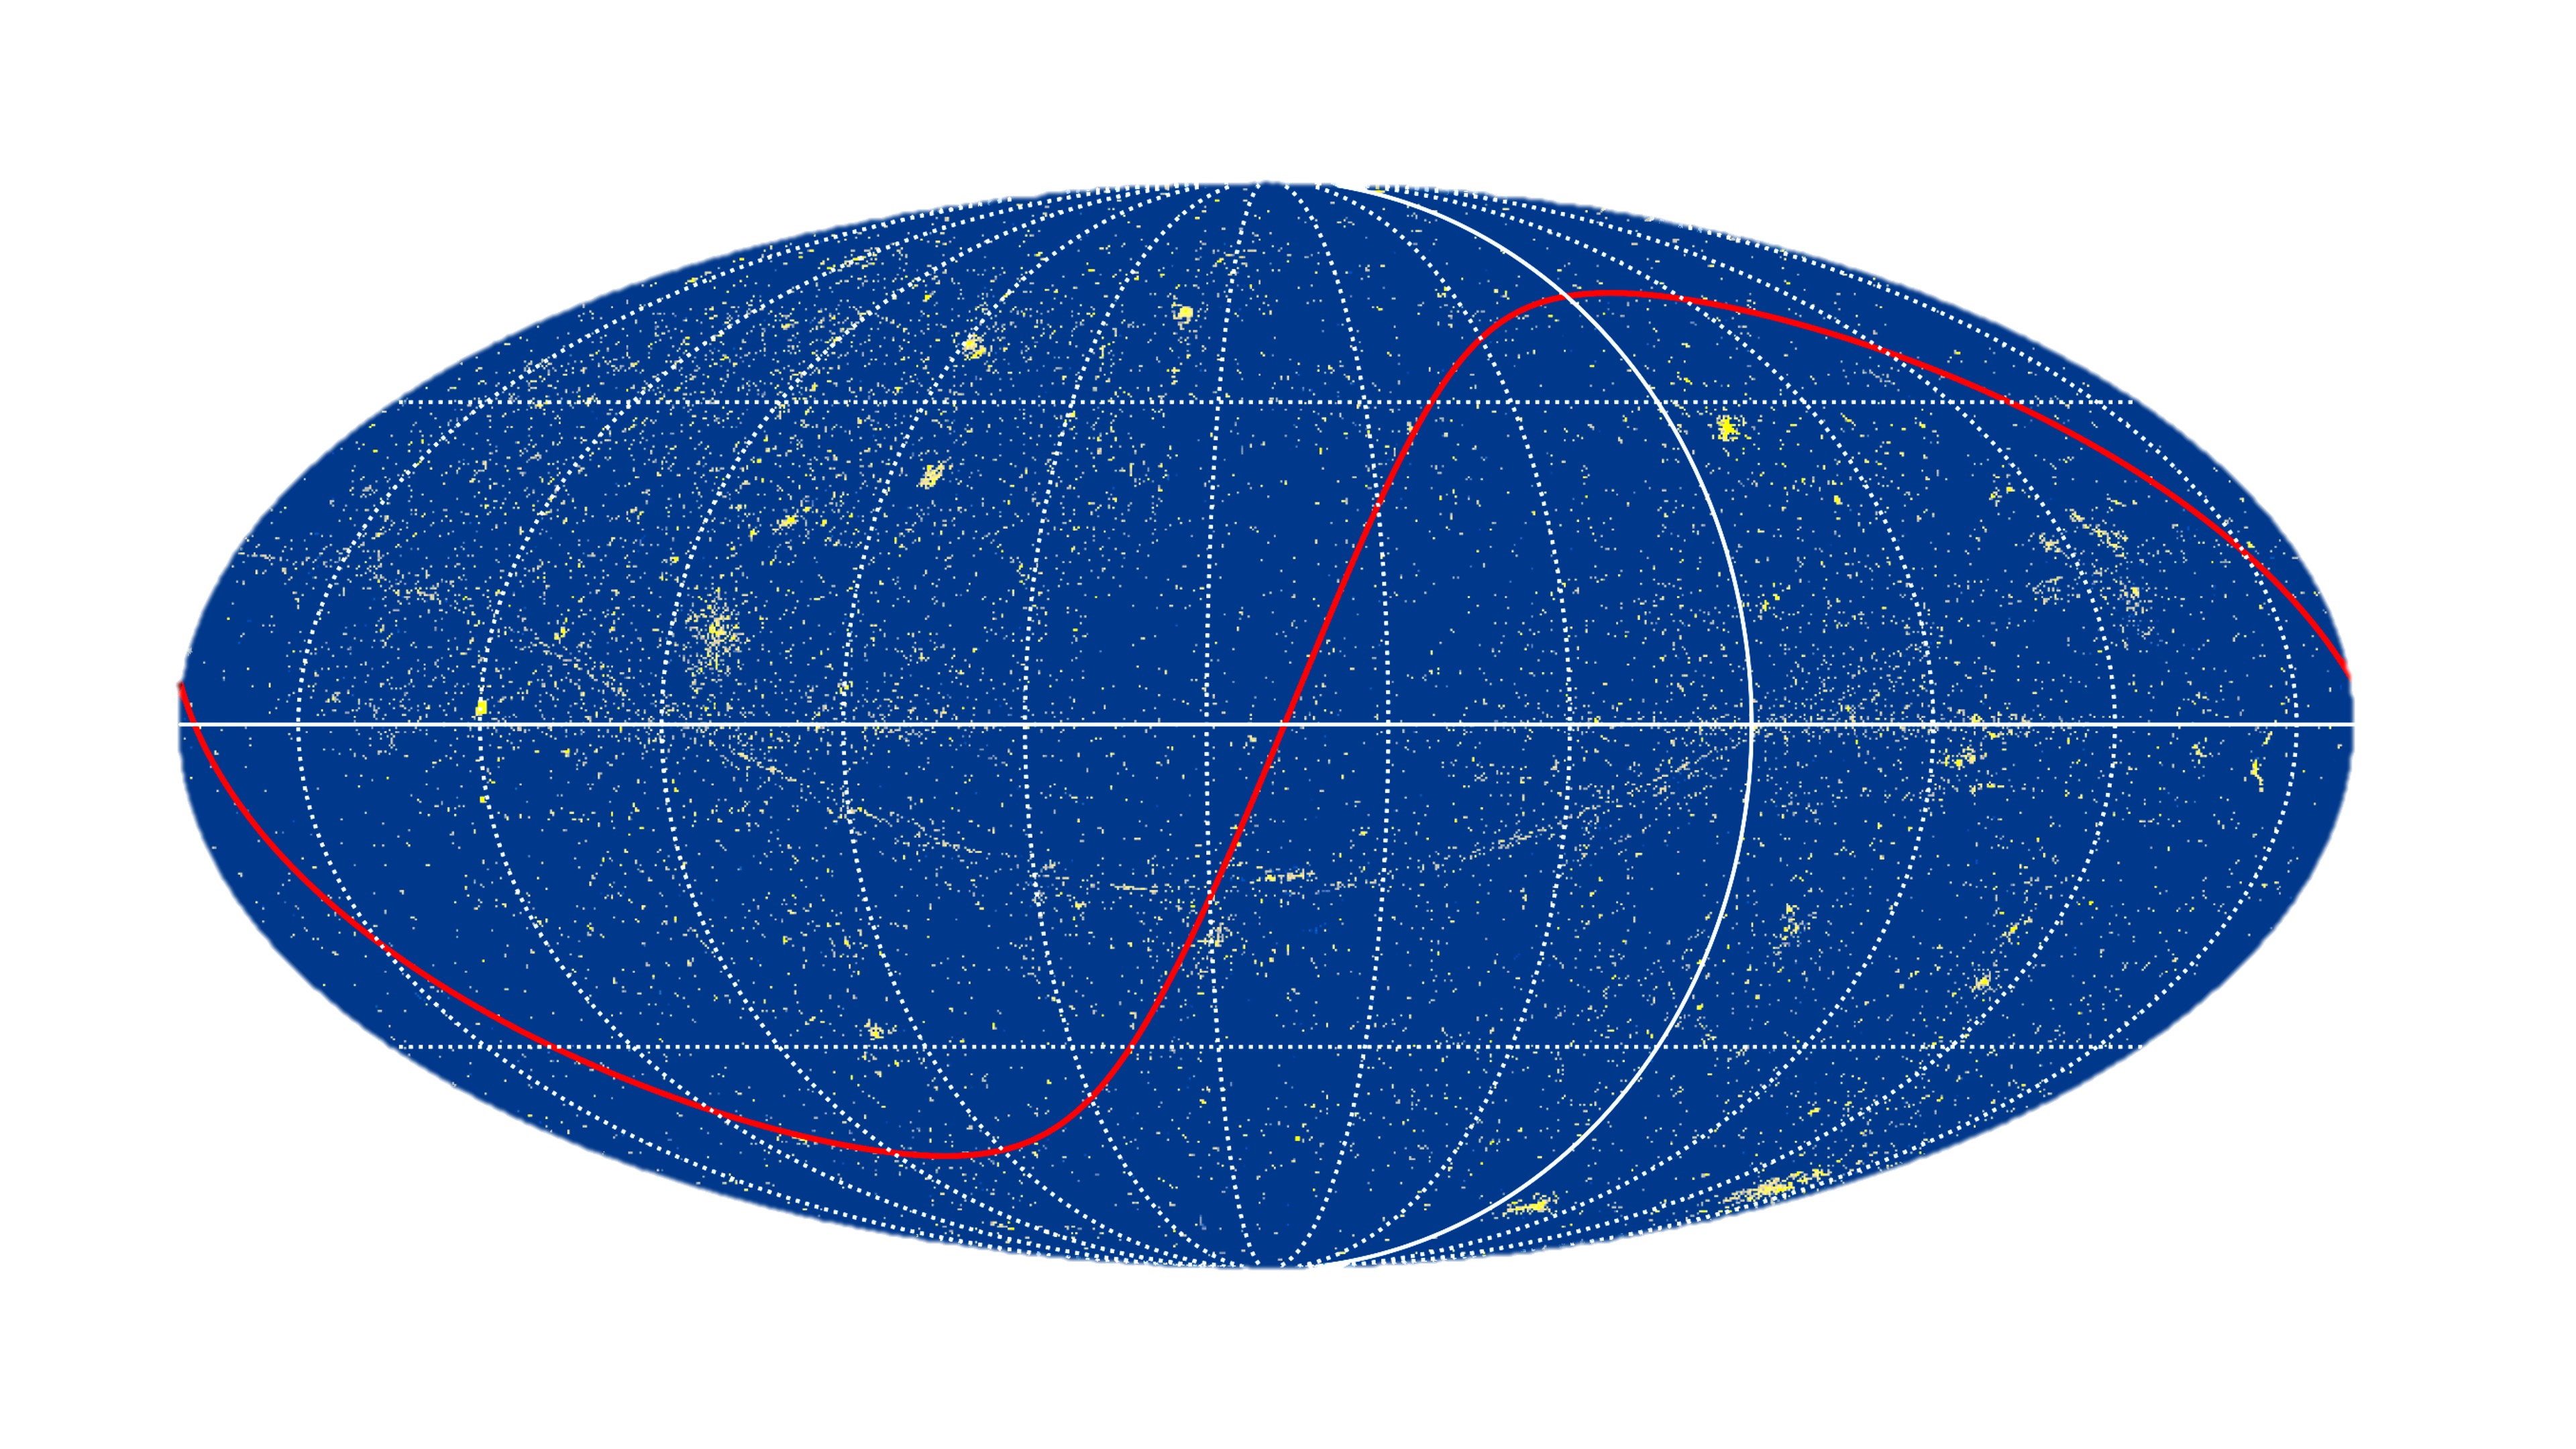 A map of the sky showing the locations of the Hubble Space Telescope observations